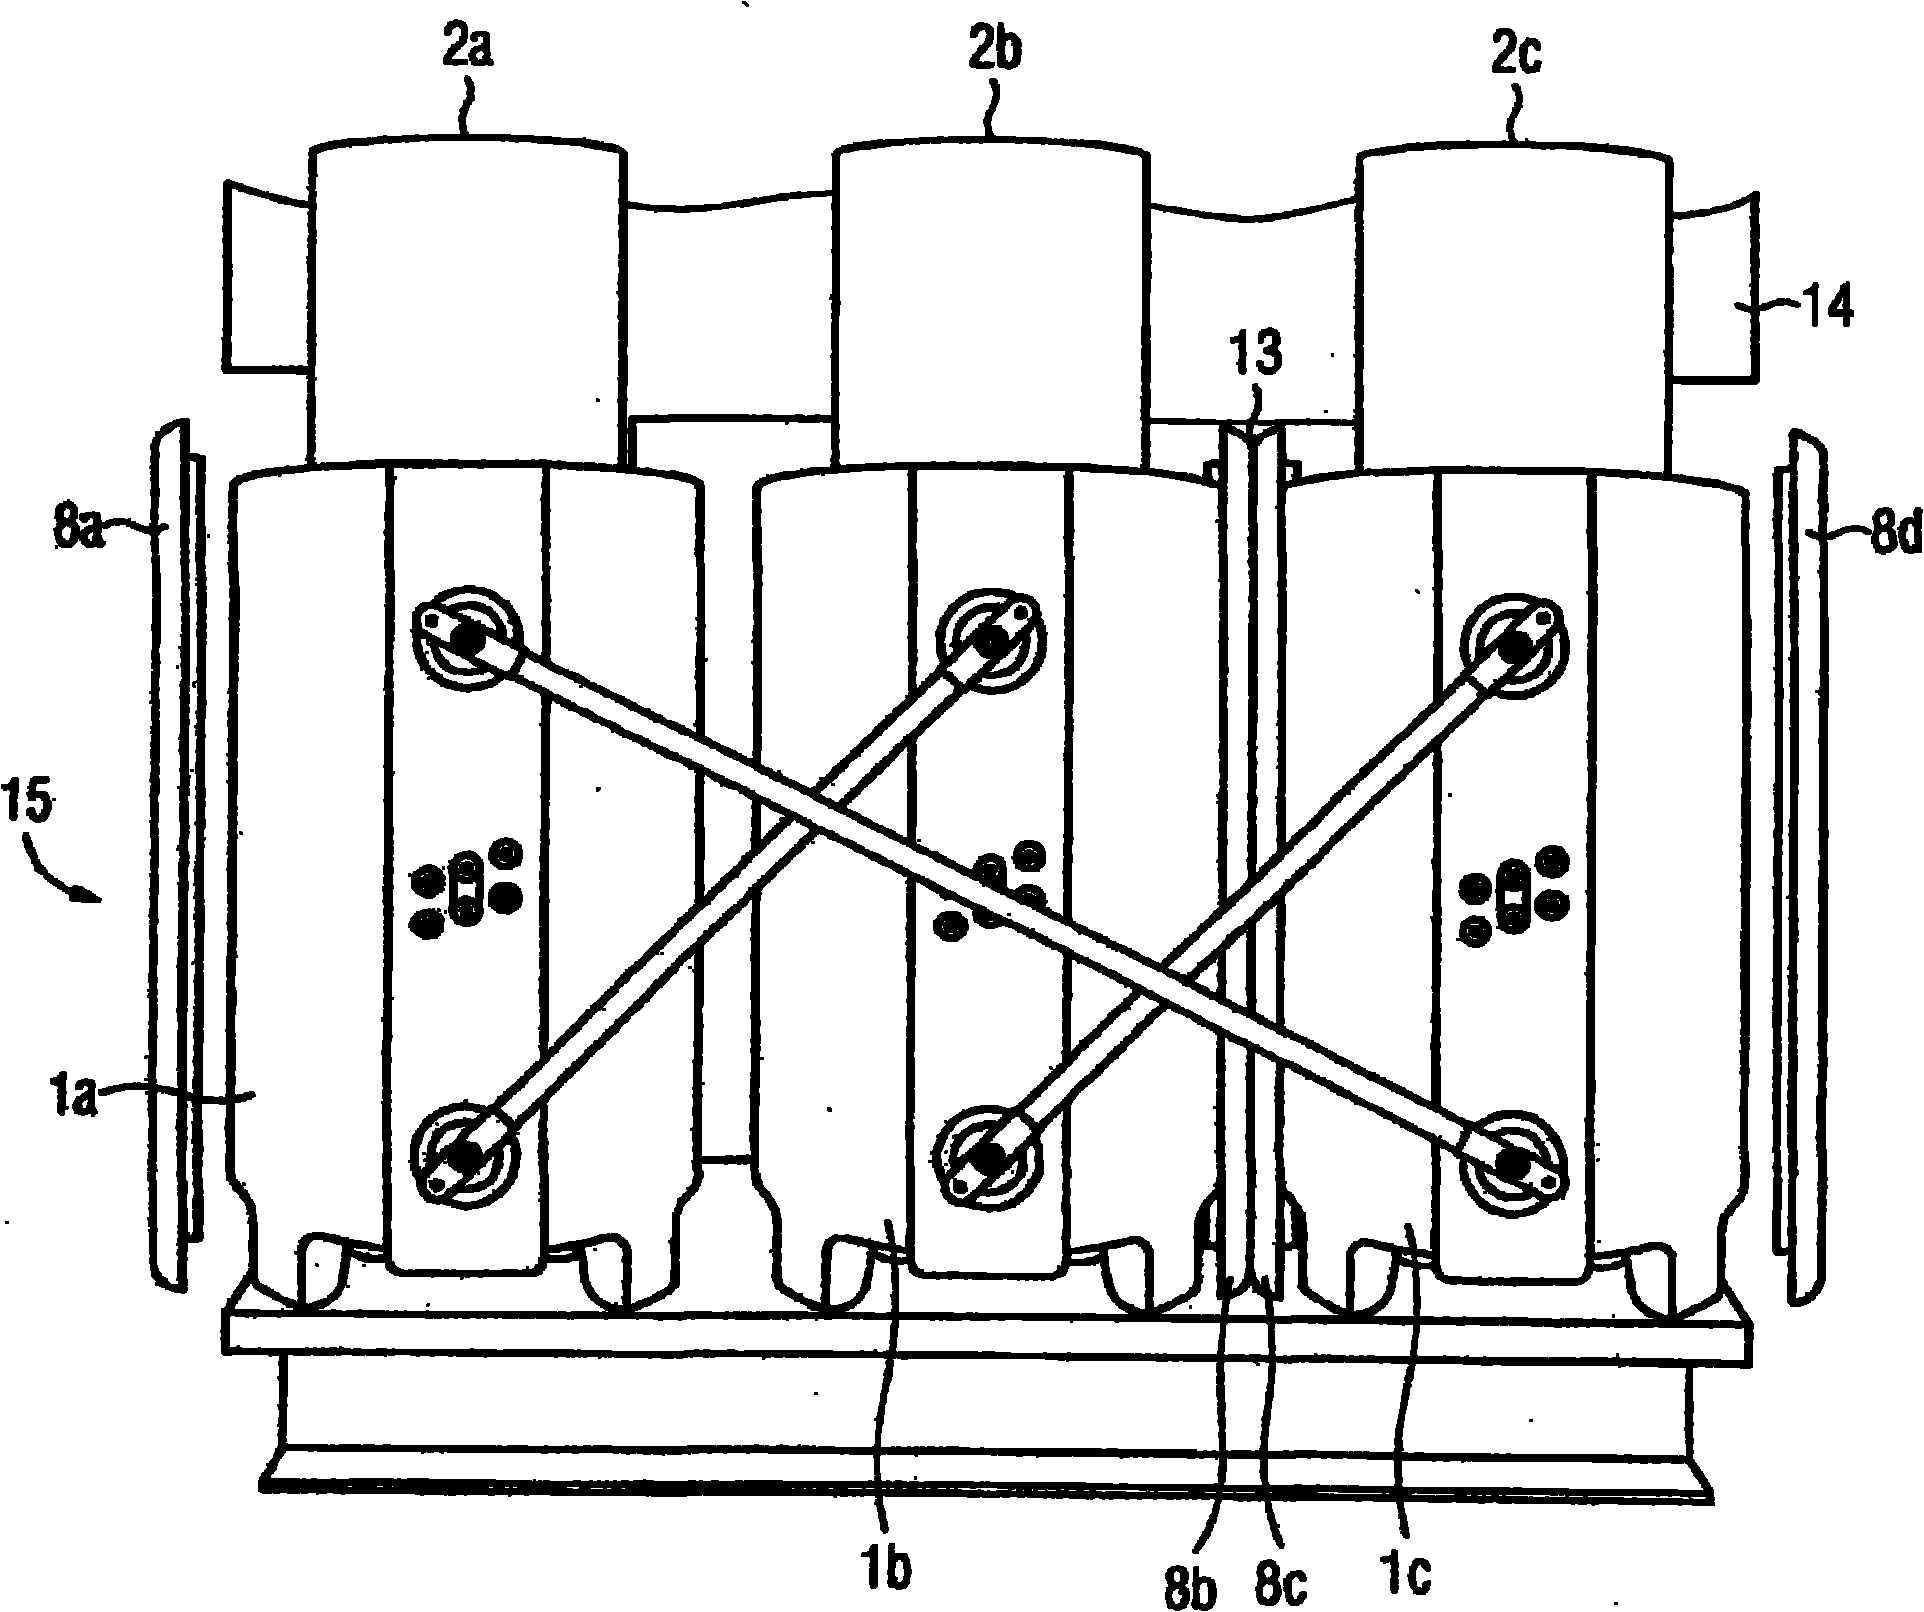 Electric winding body and transformer having forced cooling